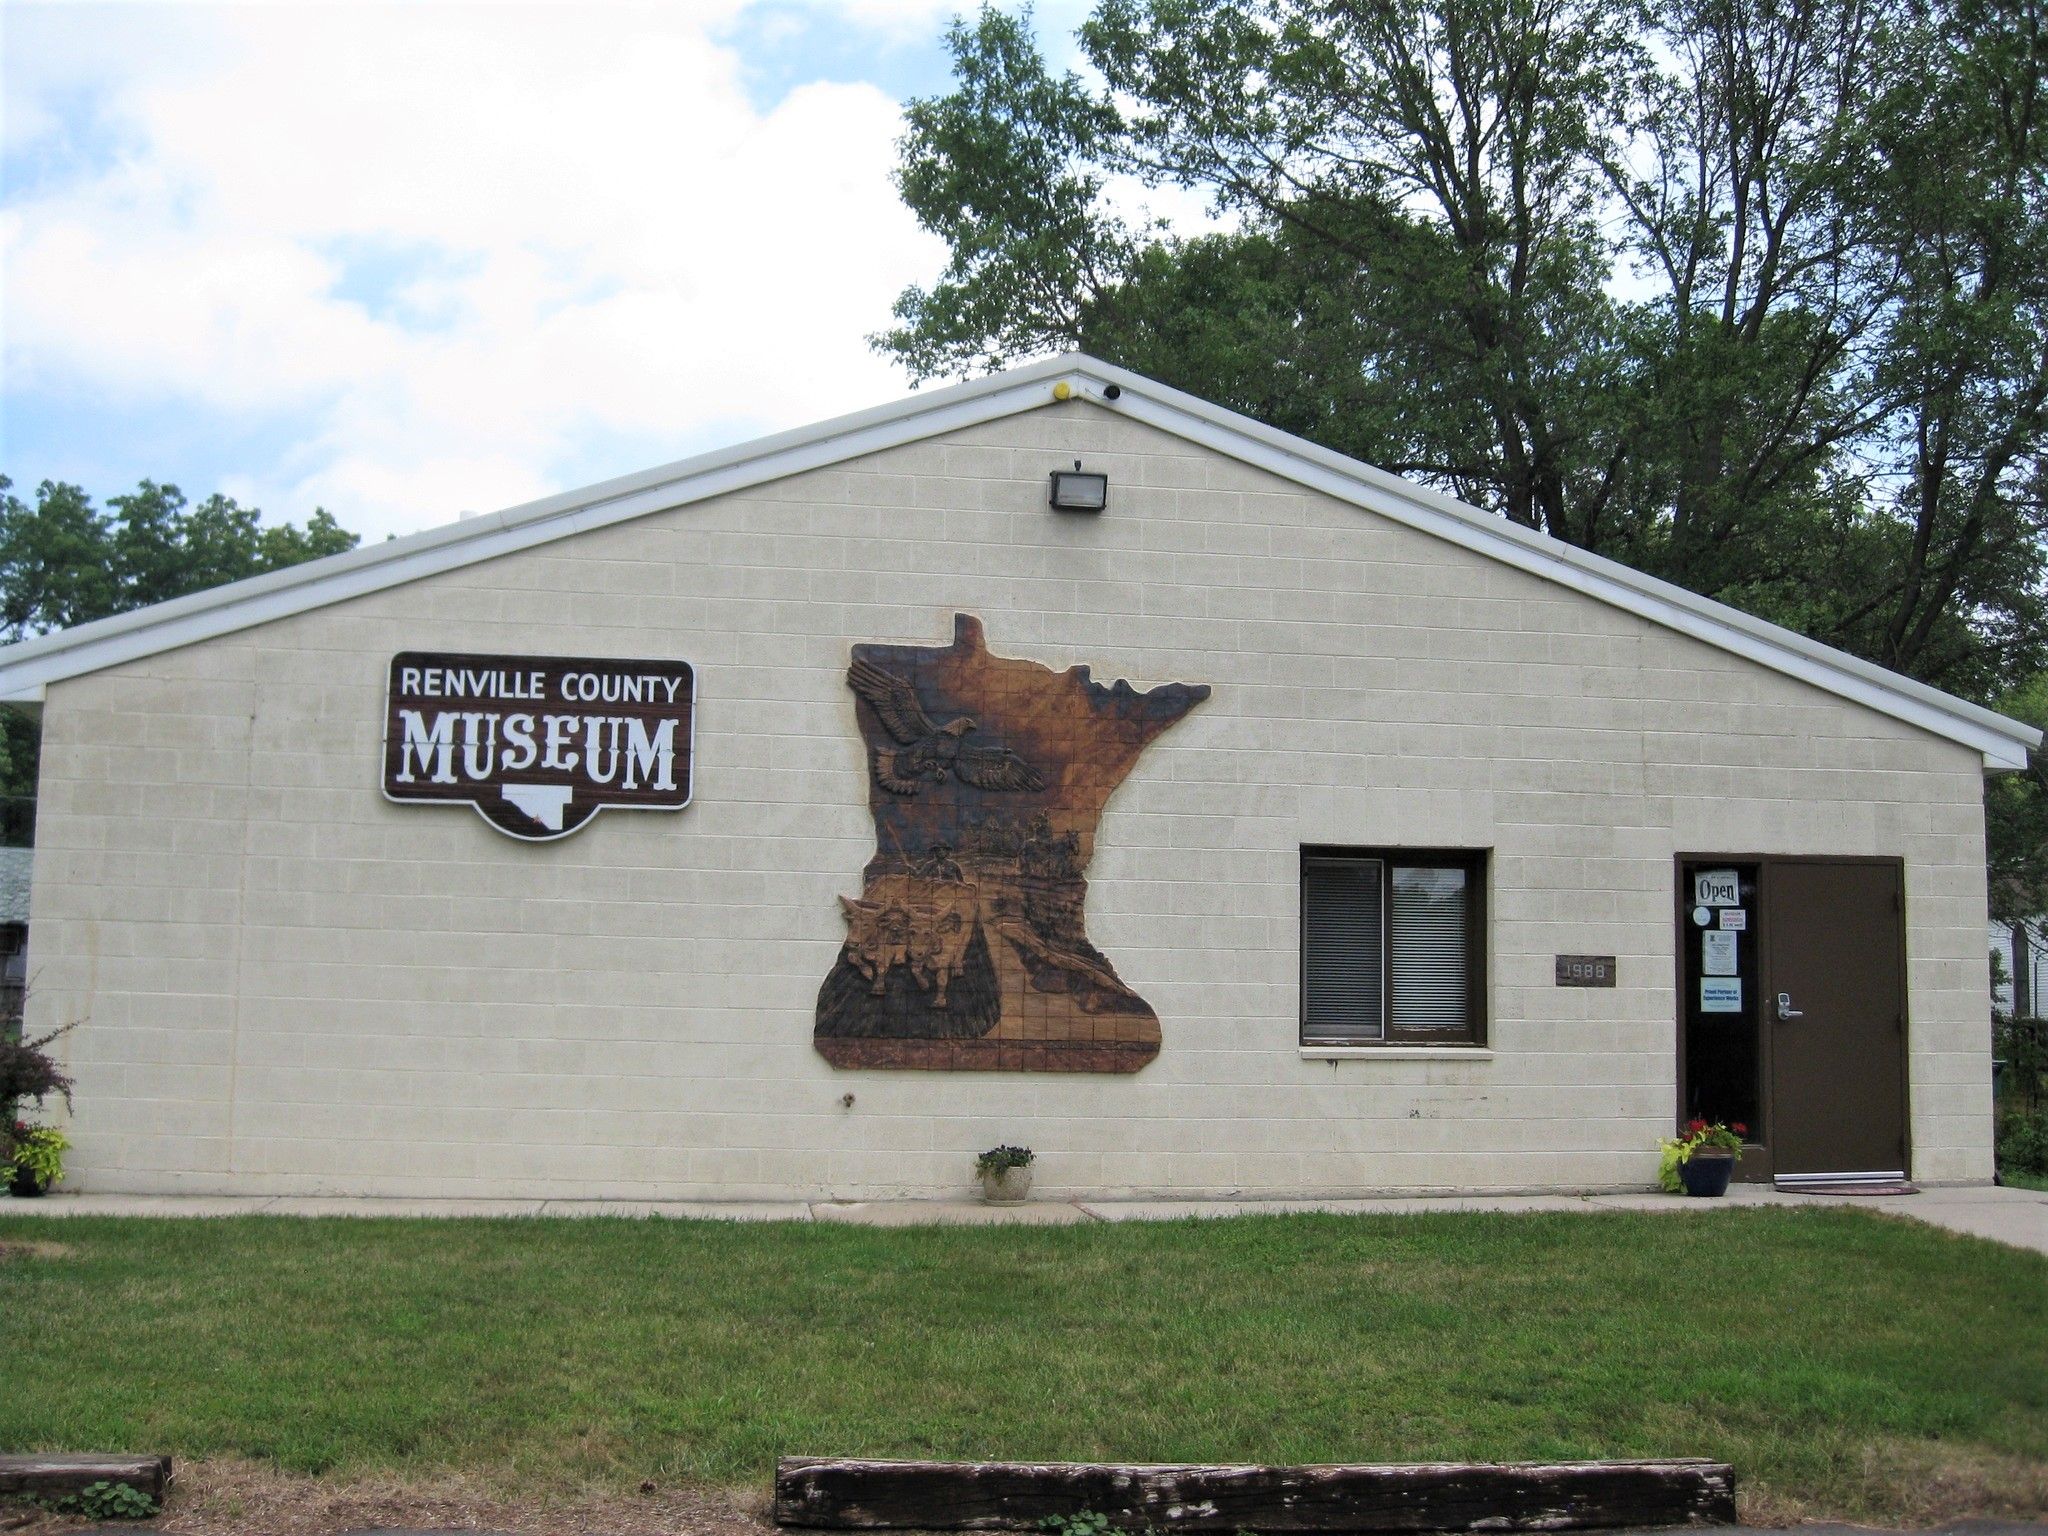 Renville County Museum